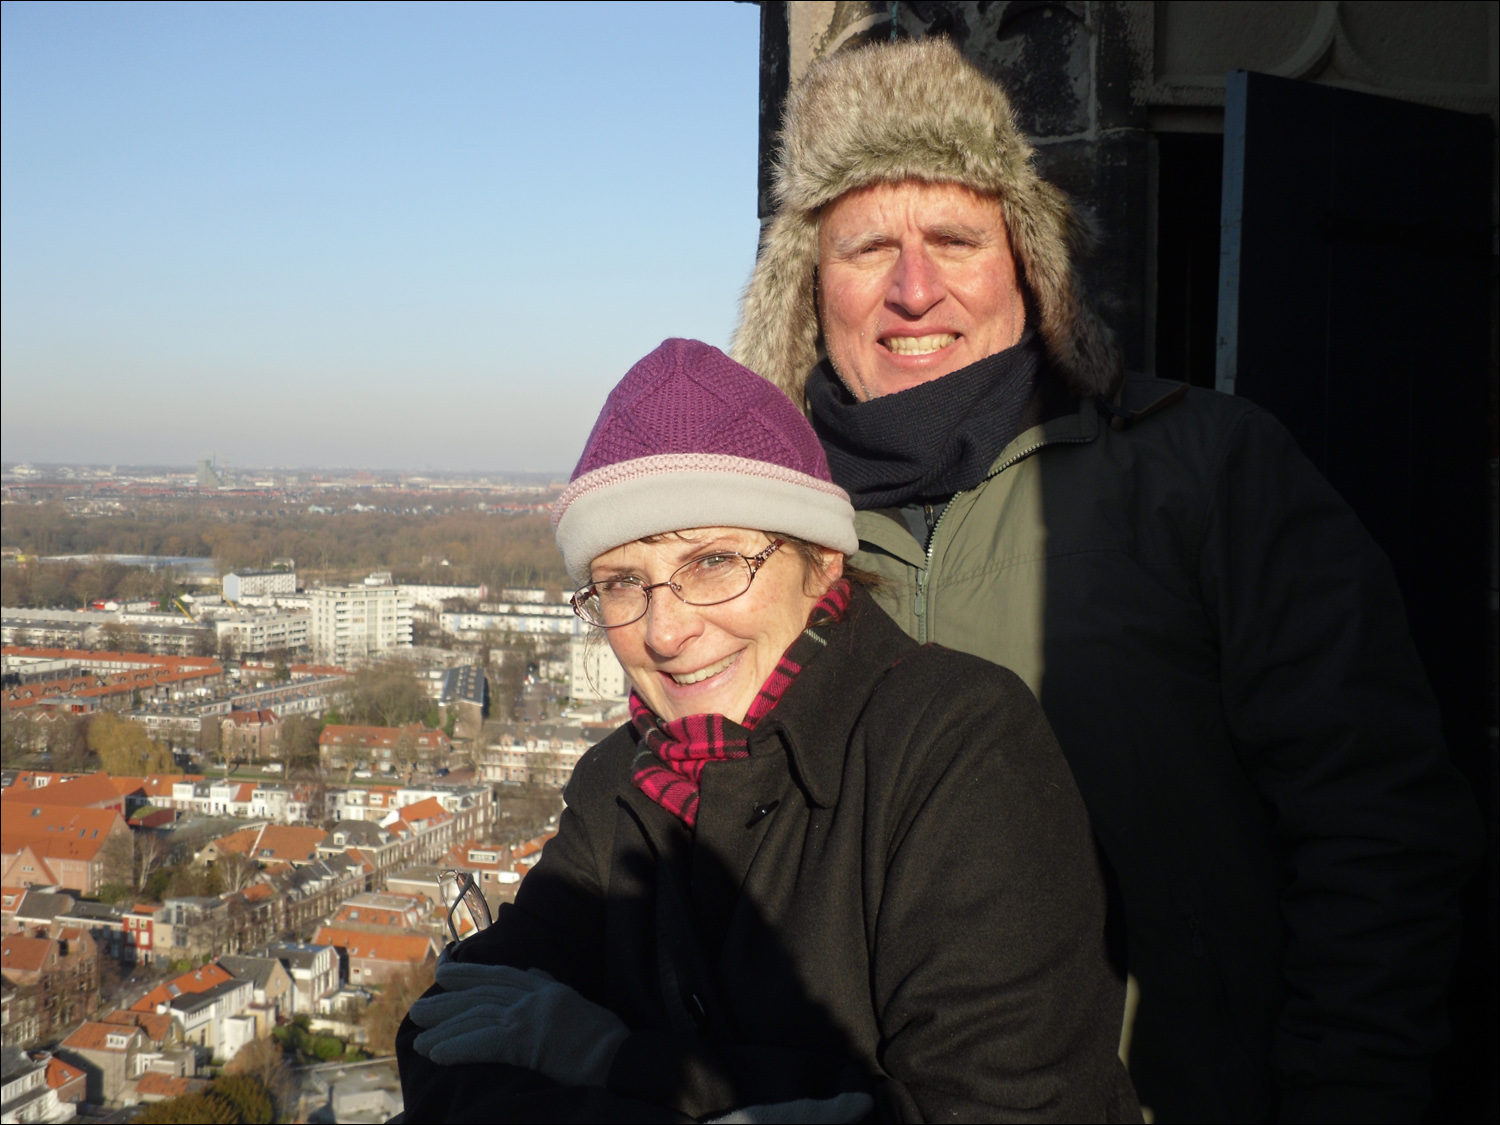 Views from the top of the clock tower on Nieuwe Kerk  Bob and Katherine